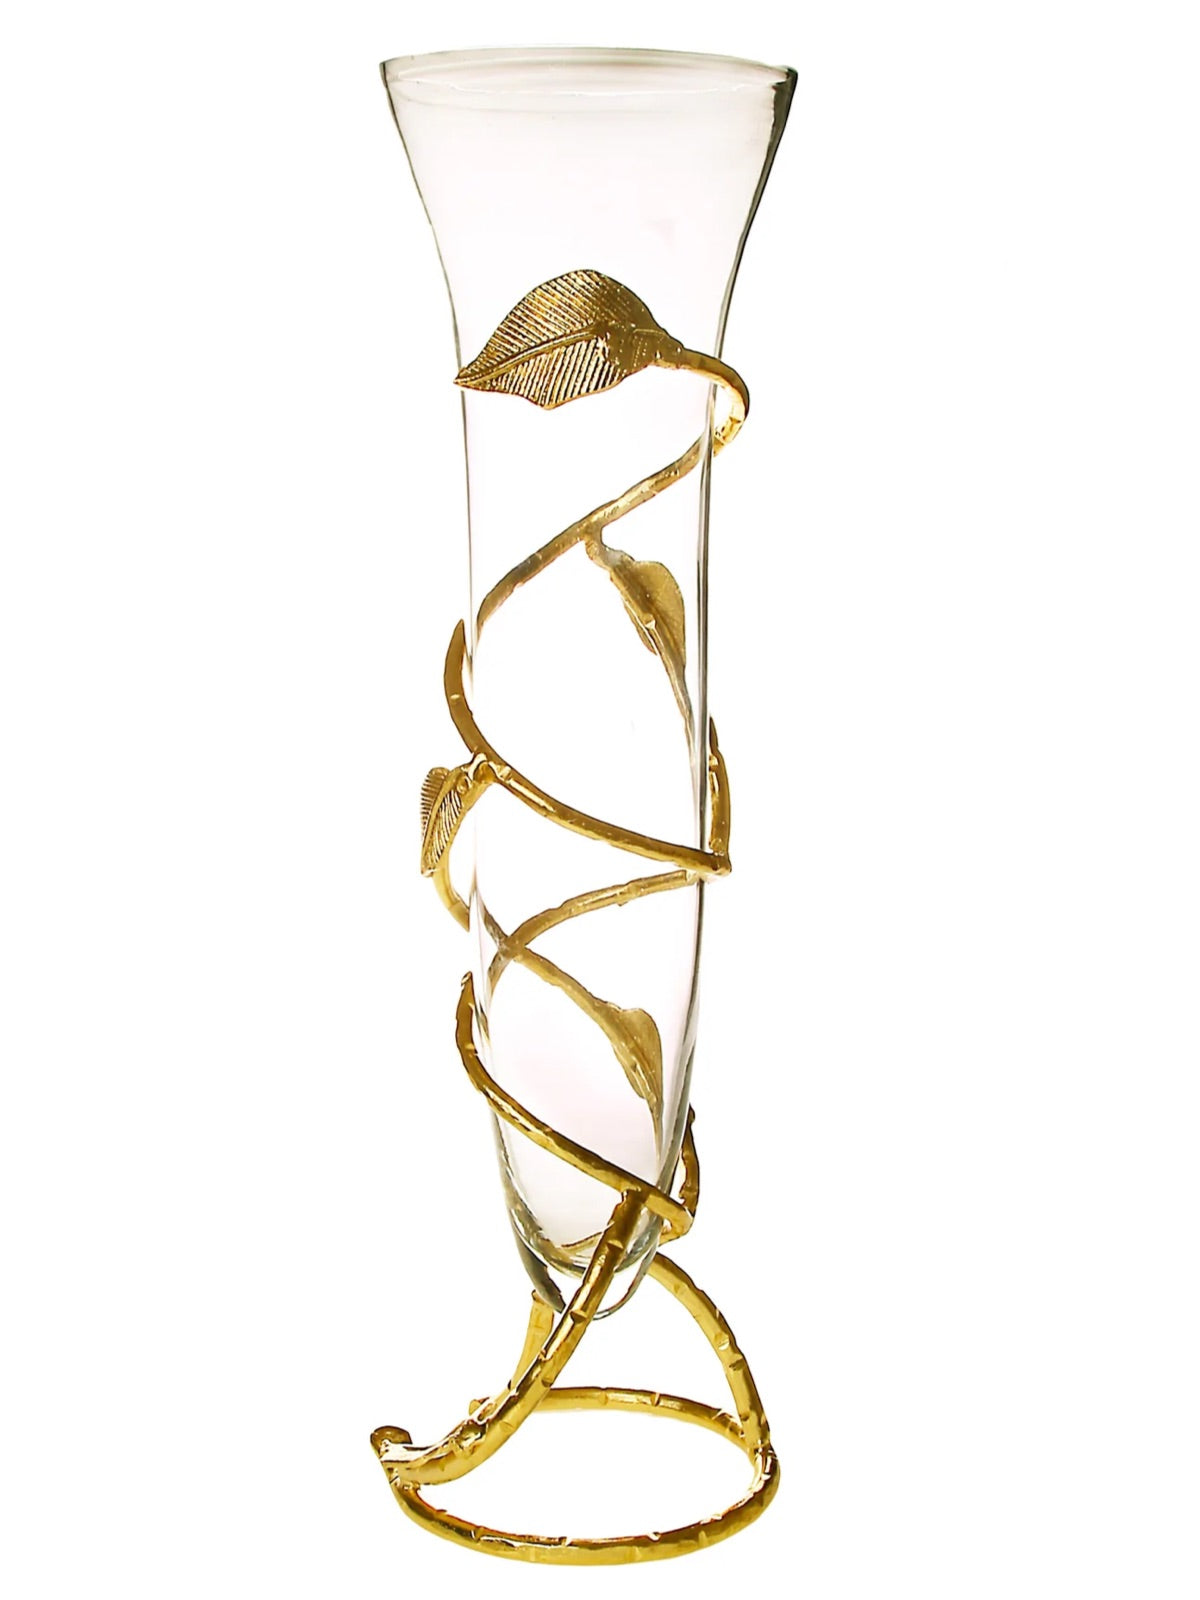 16.5H Stainless Steel Gold Spiral Leaf Vase with Luxurious Clear Glass Insert - KYA Home Decor